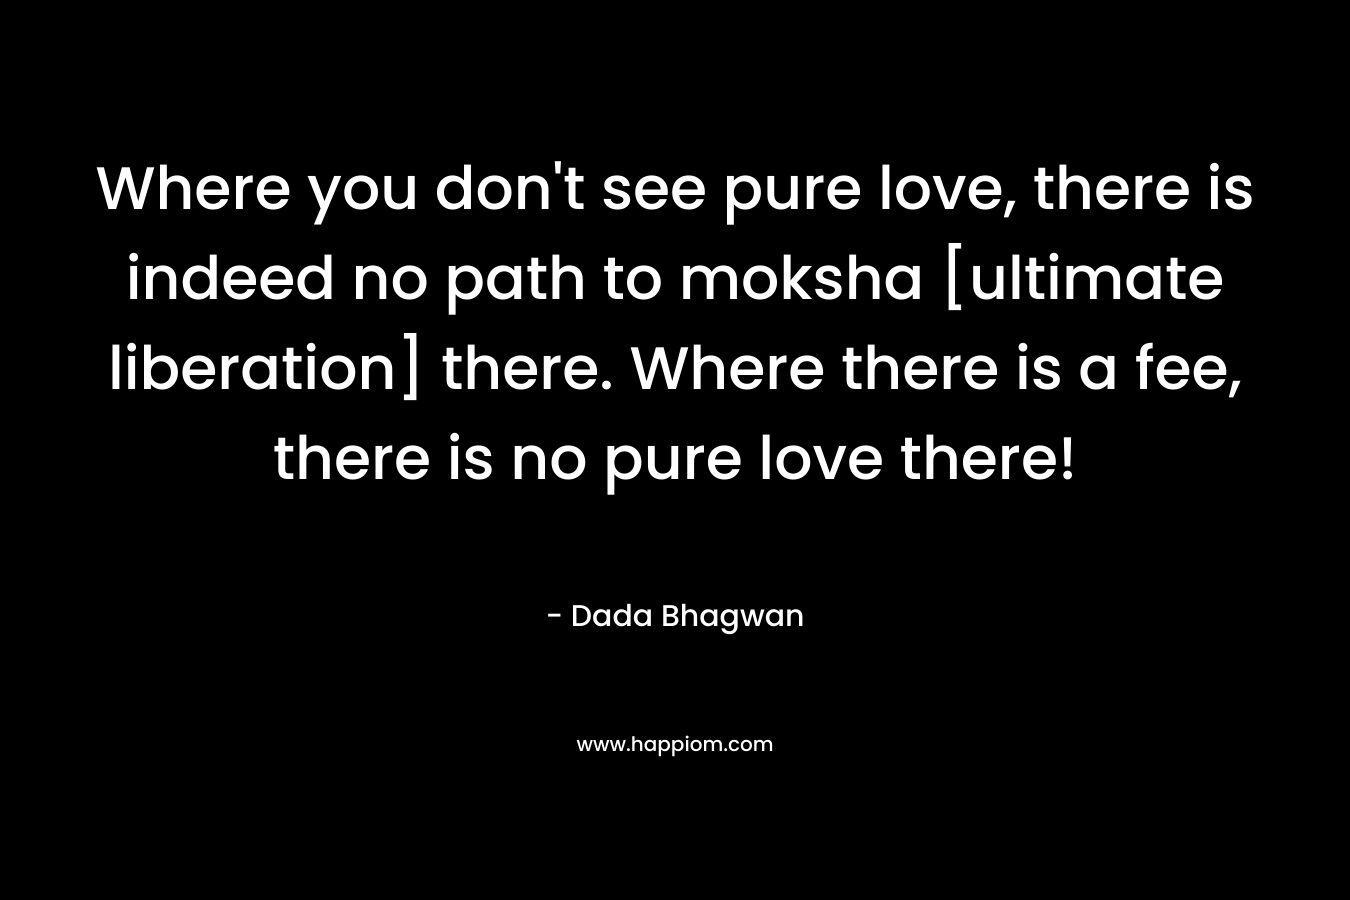 Where you don't see pure love, there is indeed no path to moksha [ultimate liberation] there. Where there is a fee, there is no pure love there!